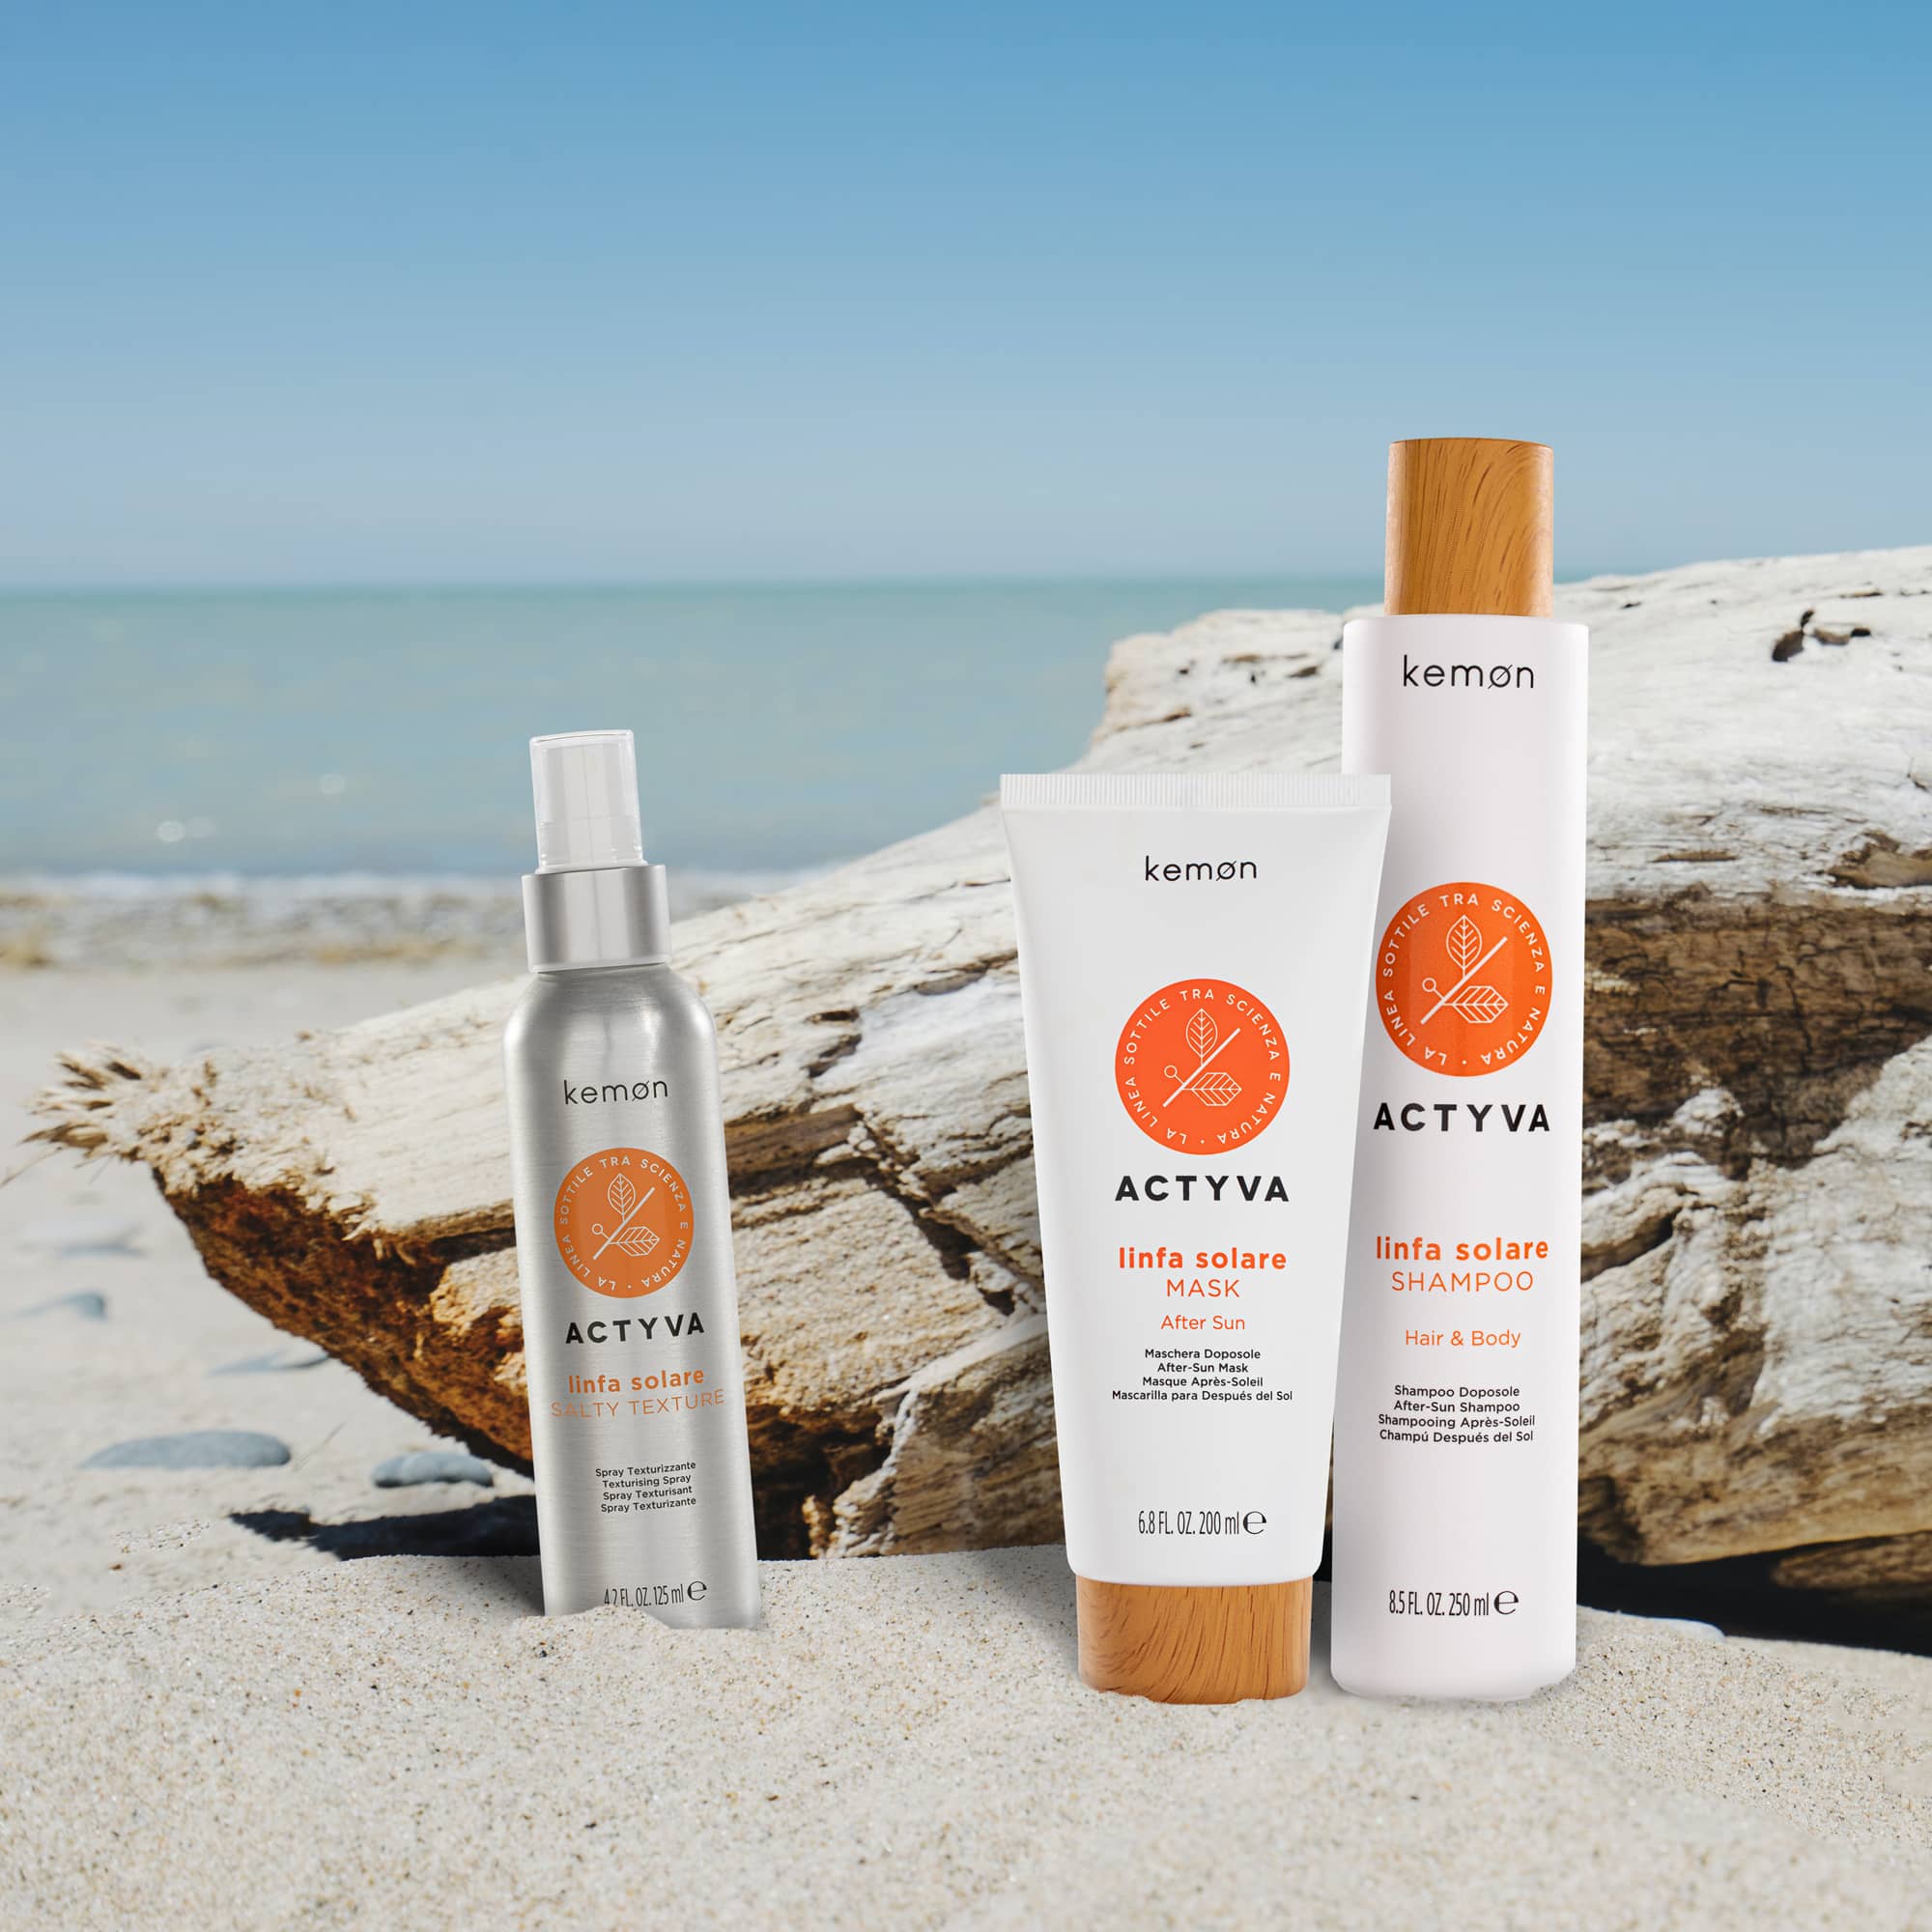 Kemon Linfa Solare. Sun protection hair products